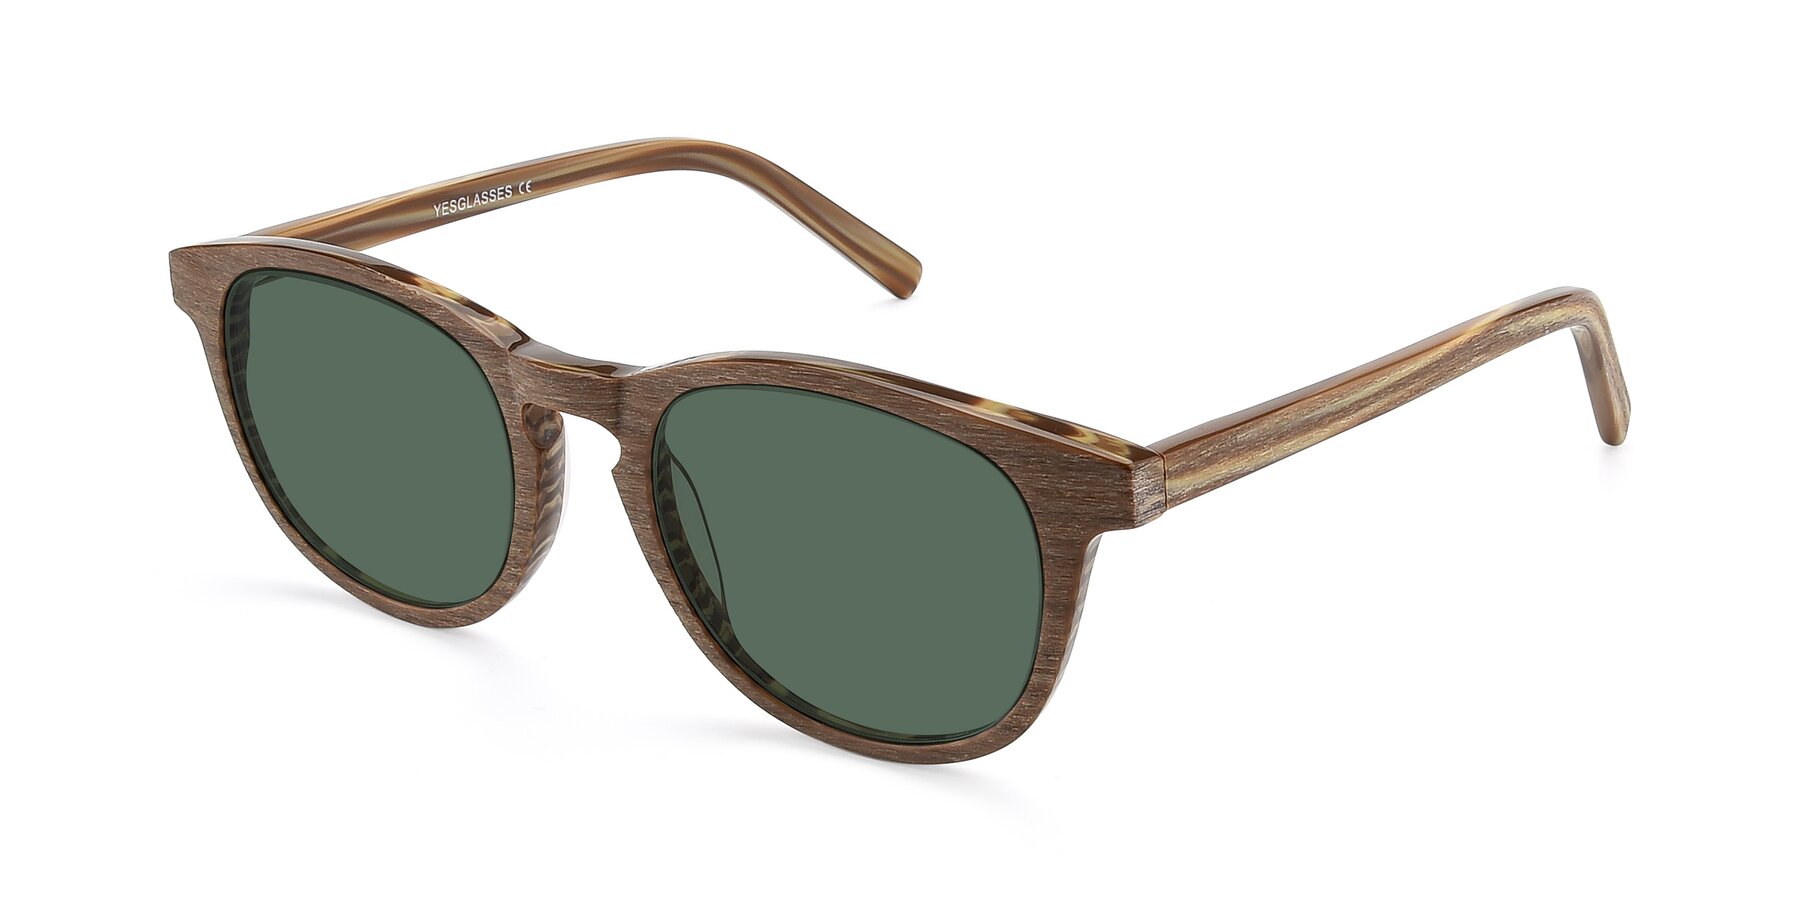 Angle of SR6044 in Brown-Wooden with Green Polarized Lenses